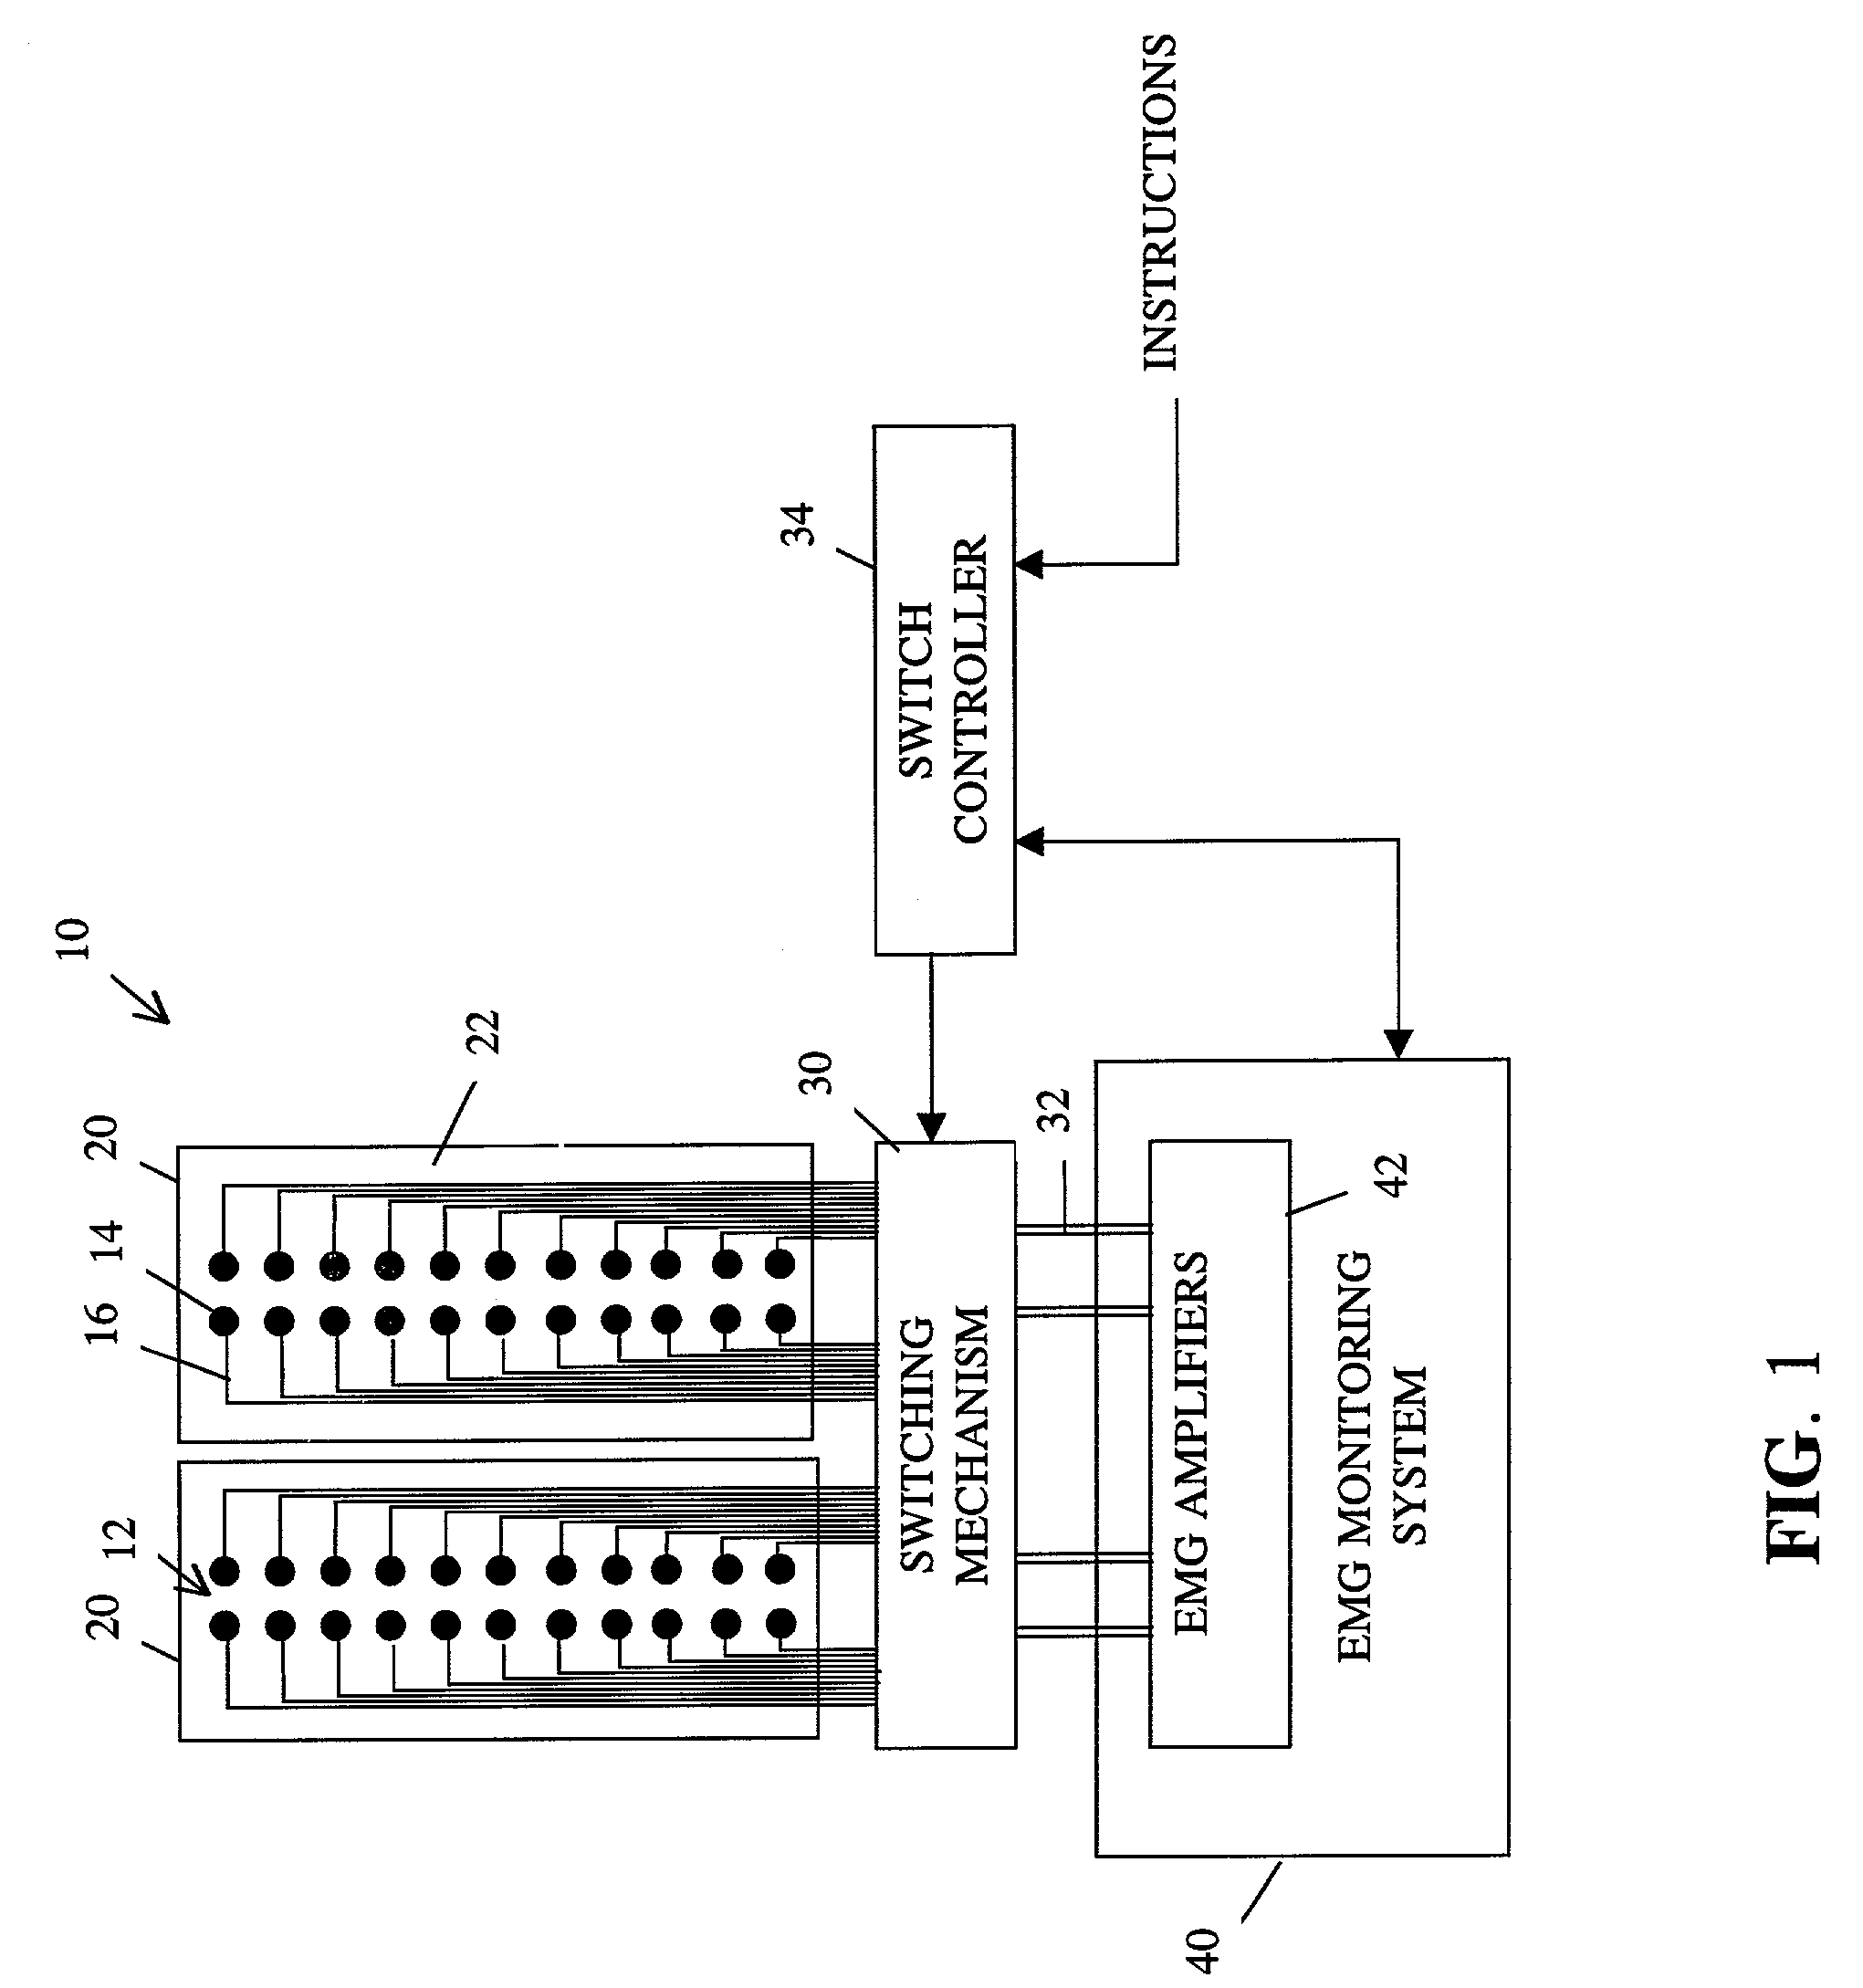 Apparatus for routing electromyography signals